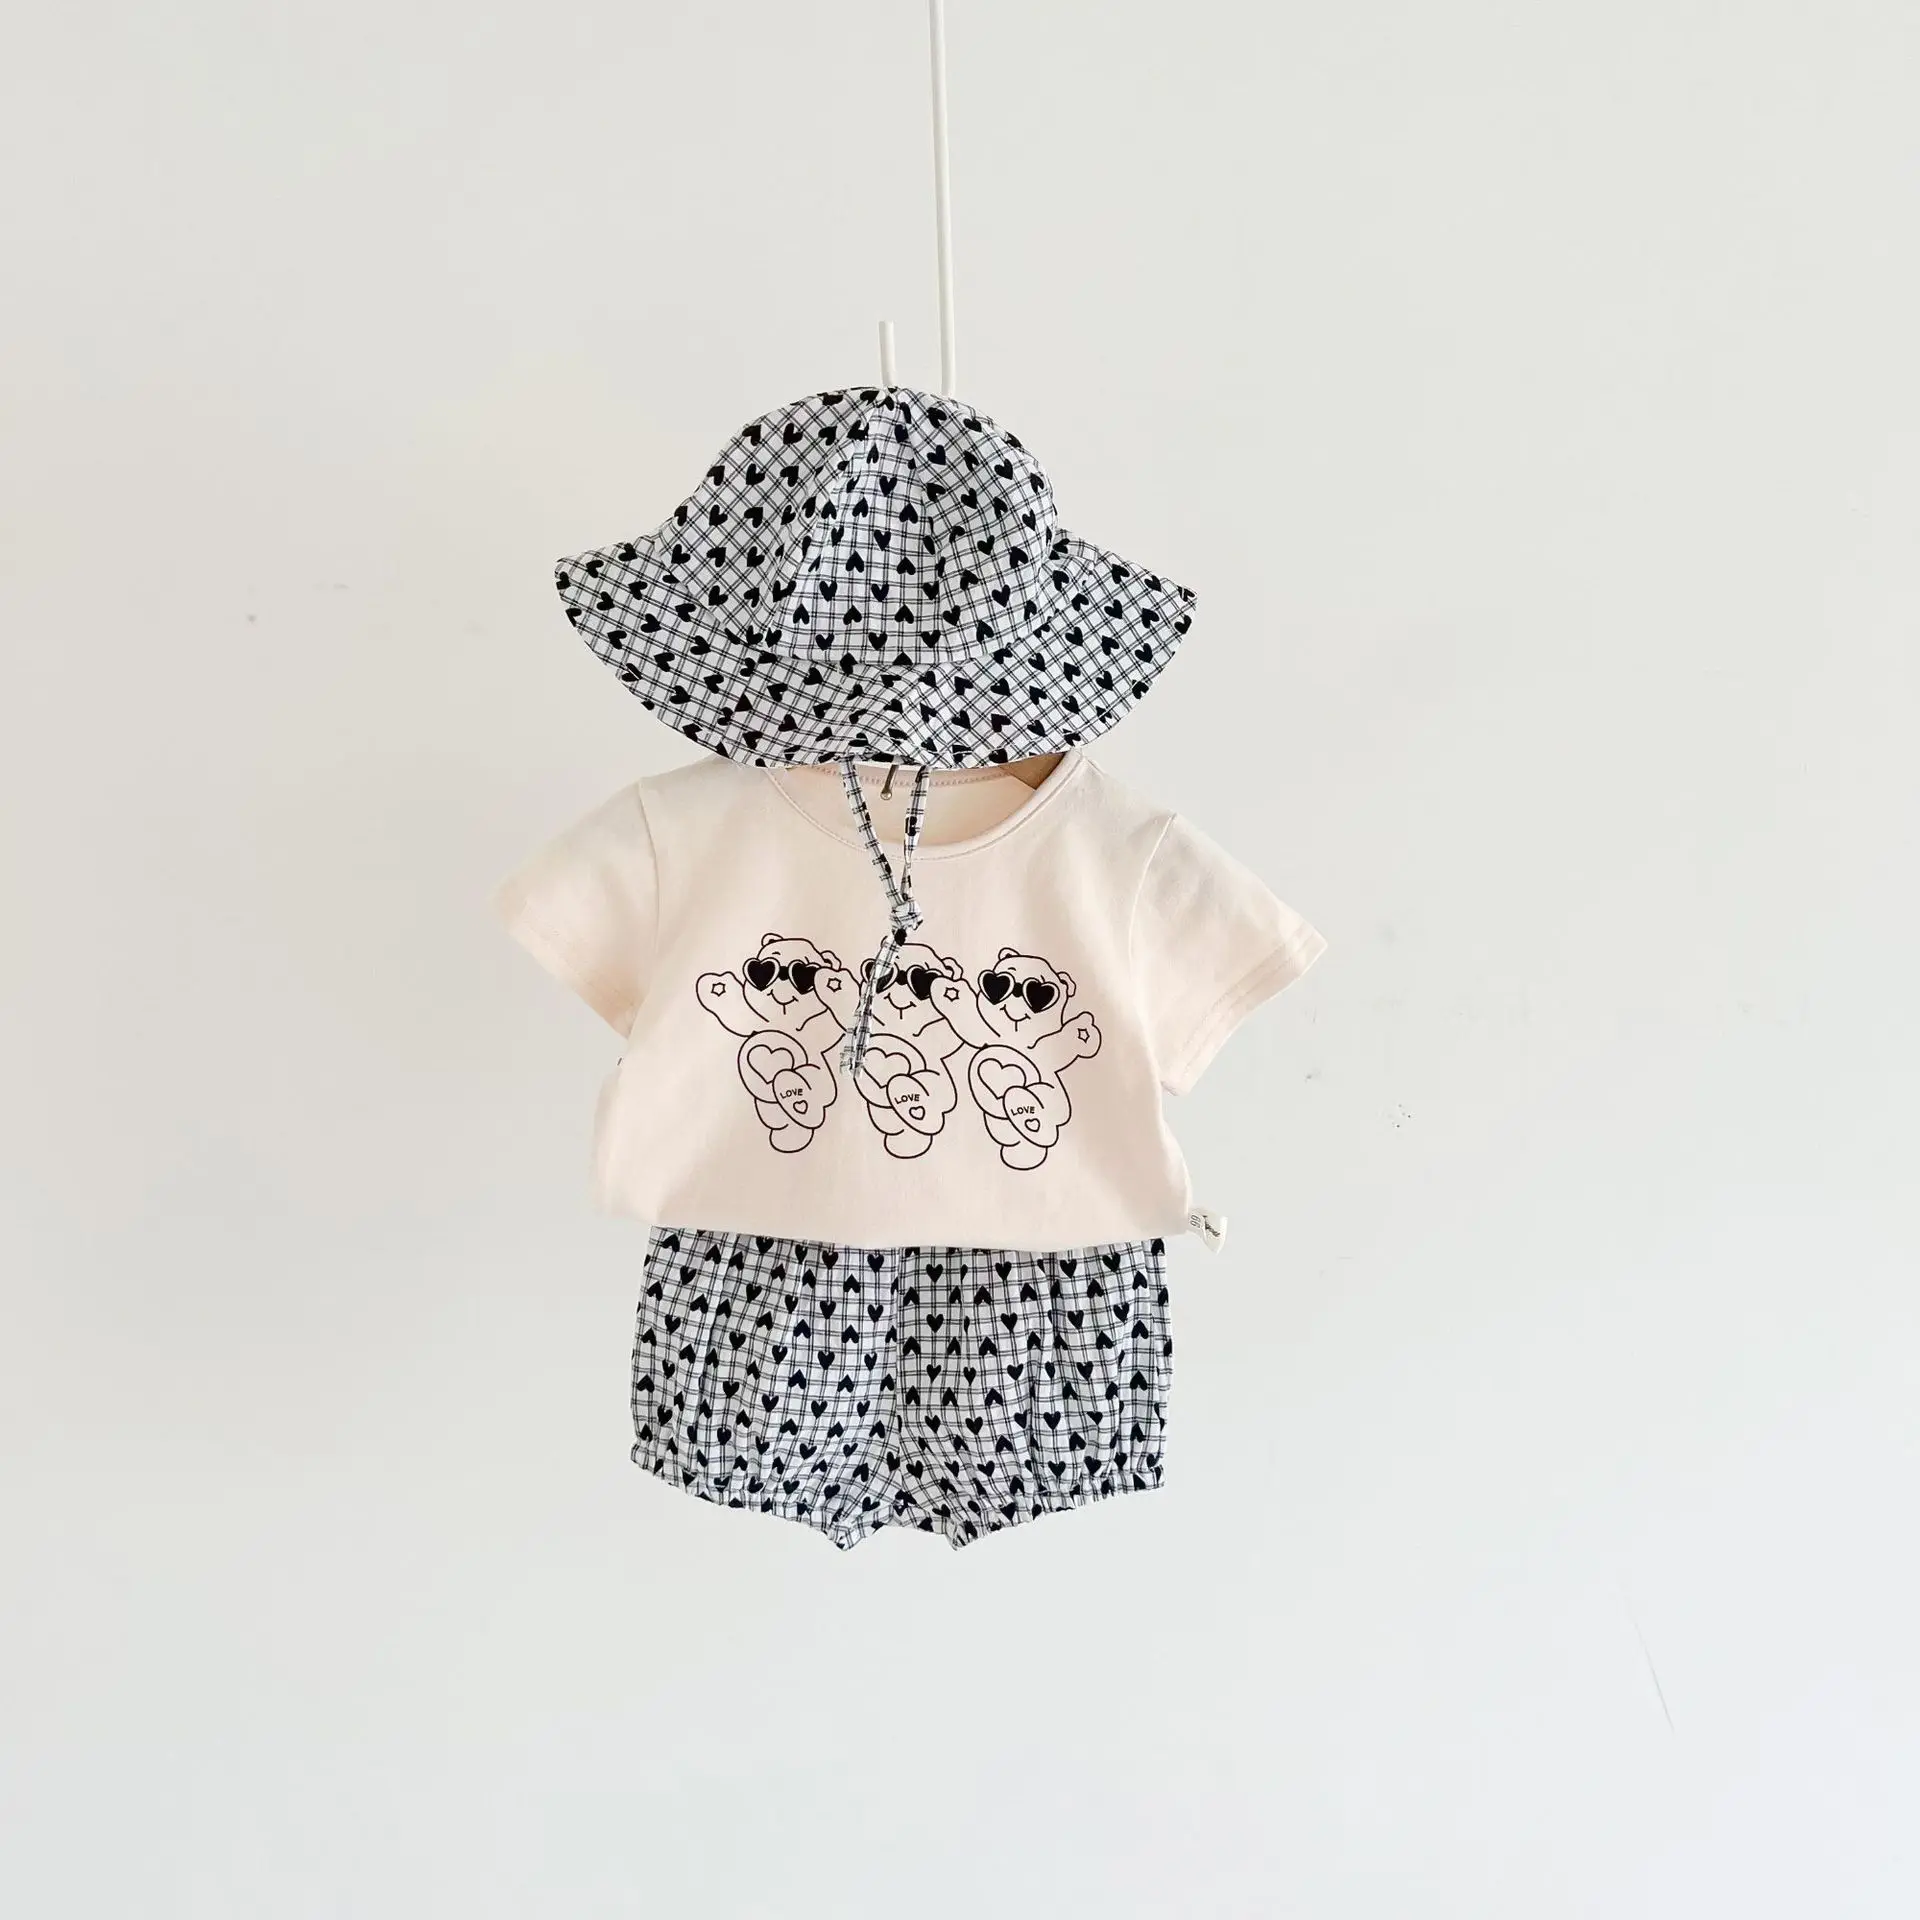 2022 Summer New Baby Short Sleeve Clothes Set Kids Girl Cute Bear Print T Shirt + Shorts + Hat 3pcs Set Infant Boy Outfits Suit Baby Clothing Set best of sale